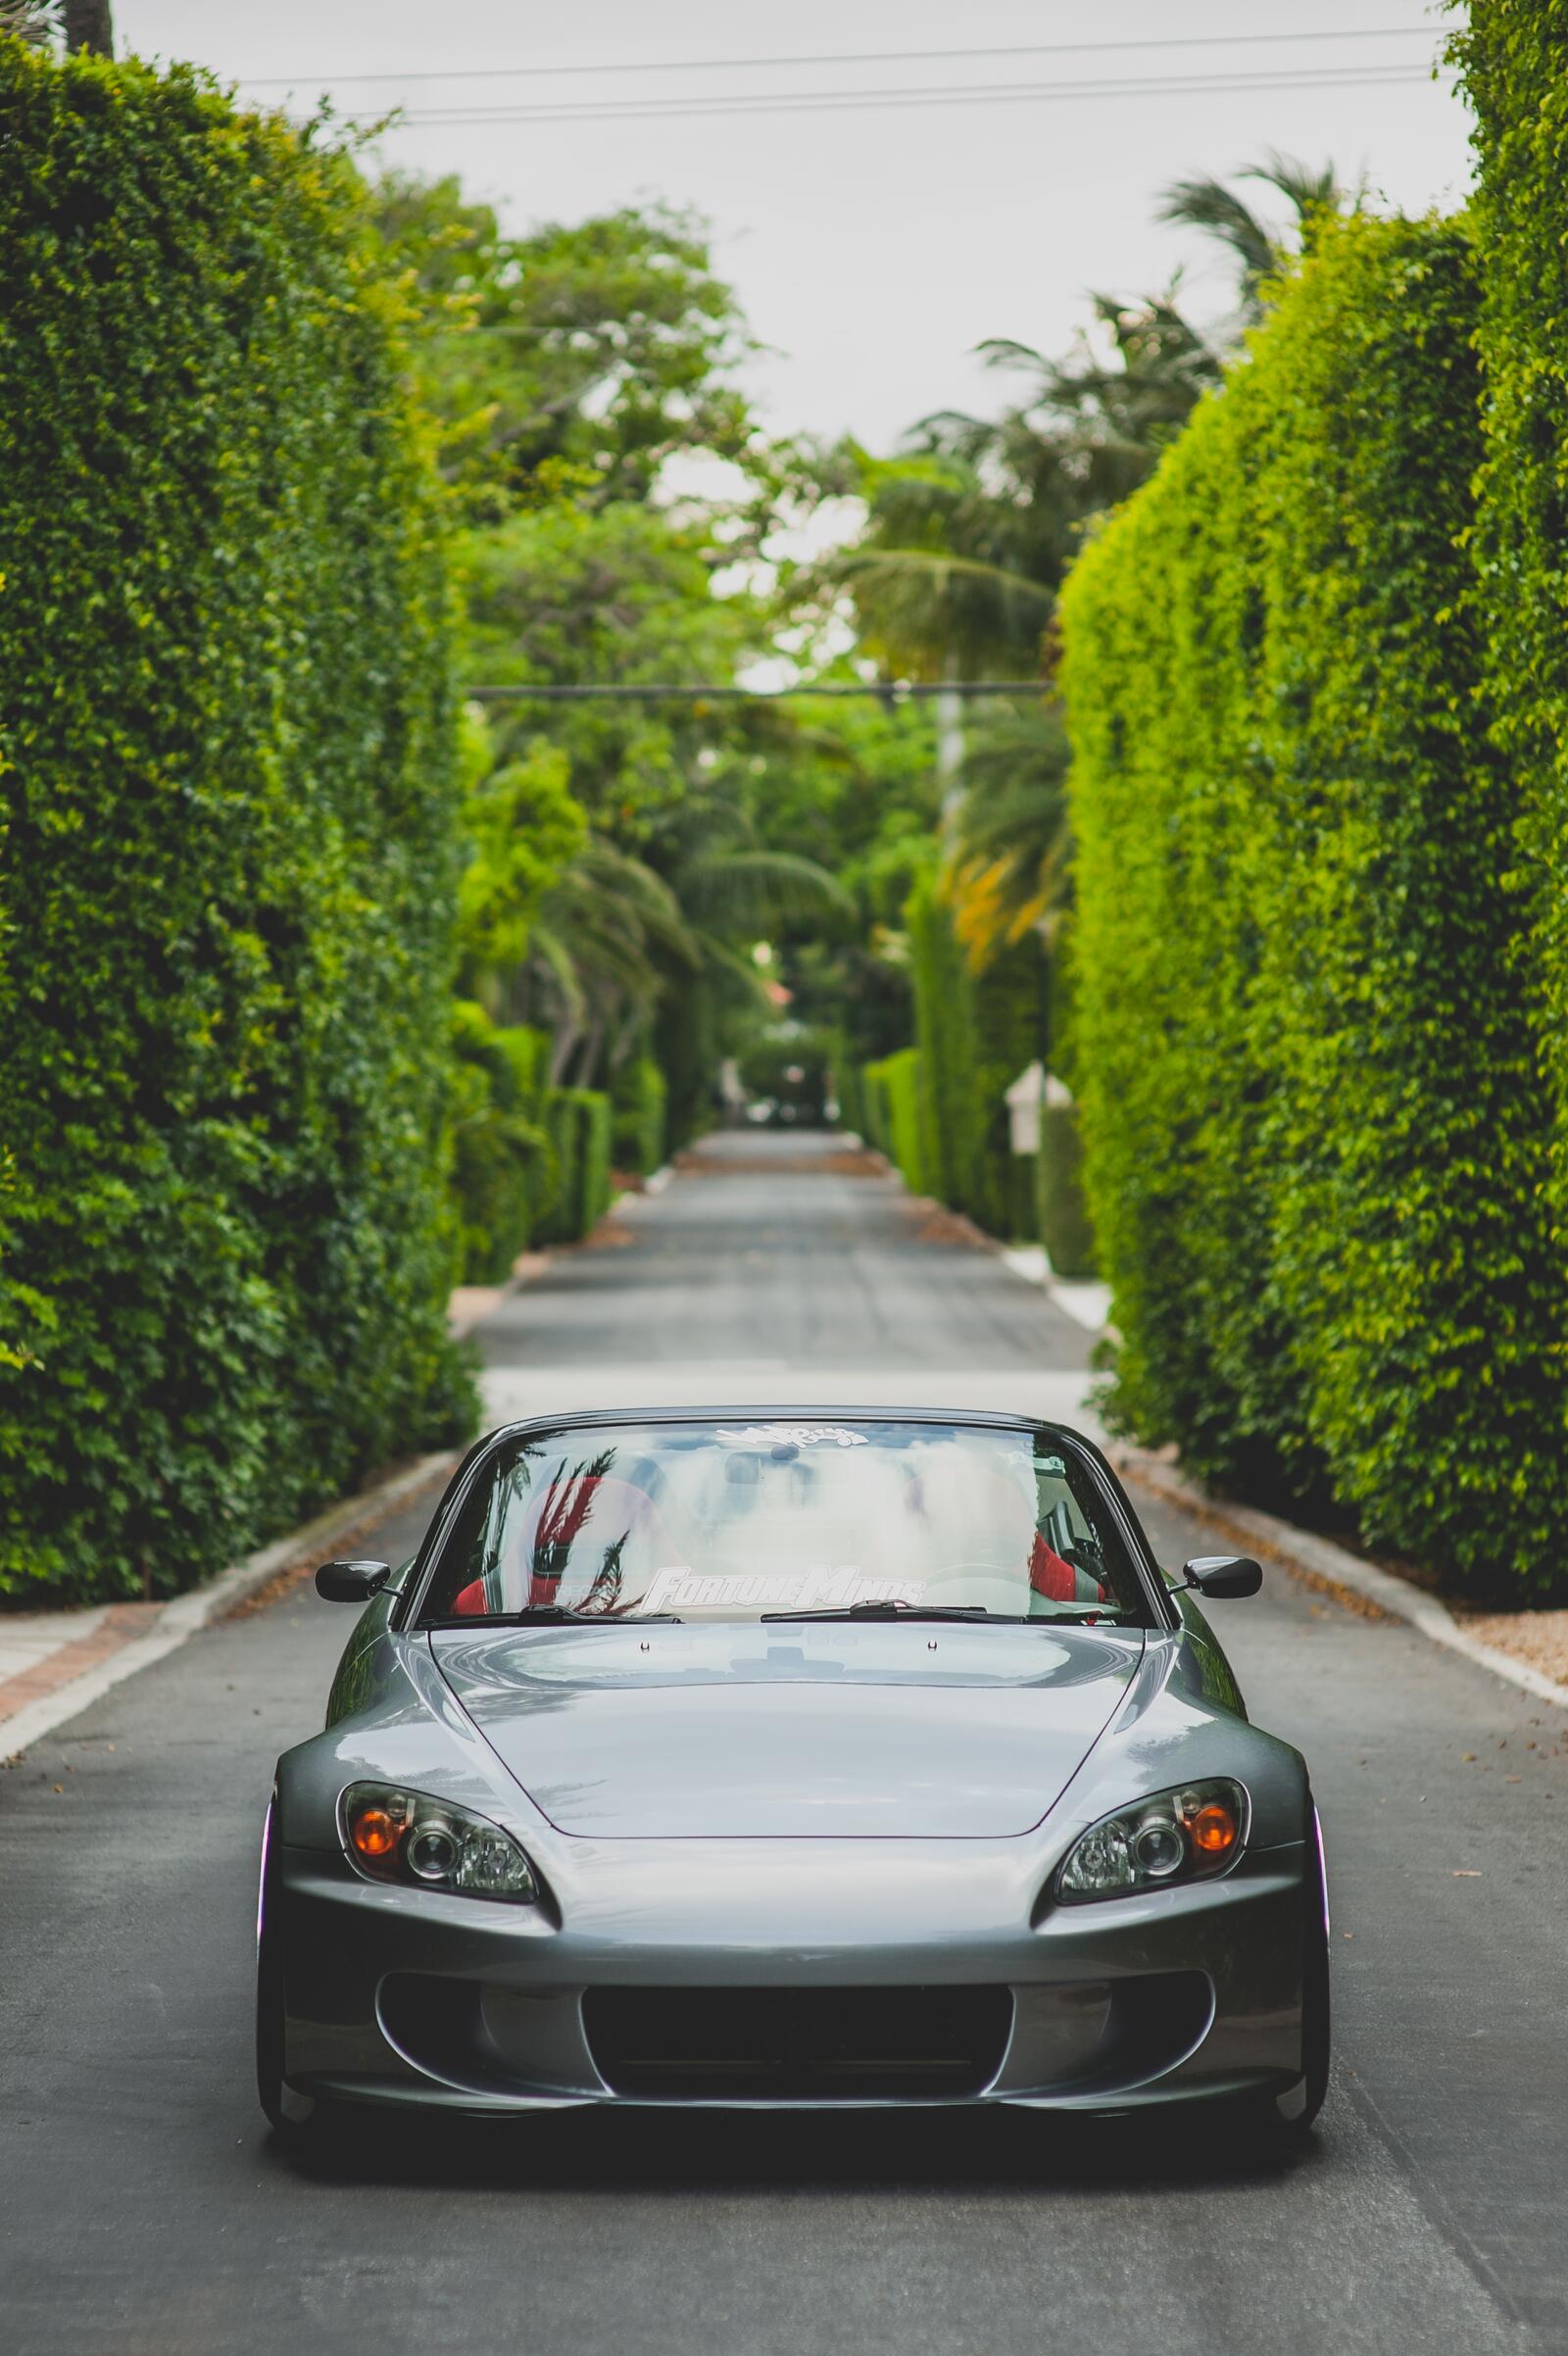 Wallpapers wallpaper honda s2000 front view sports cars on the desktop